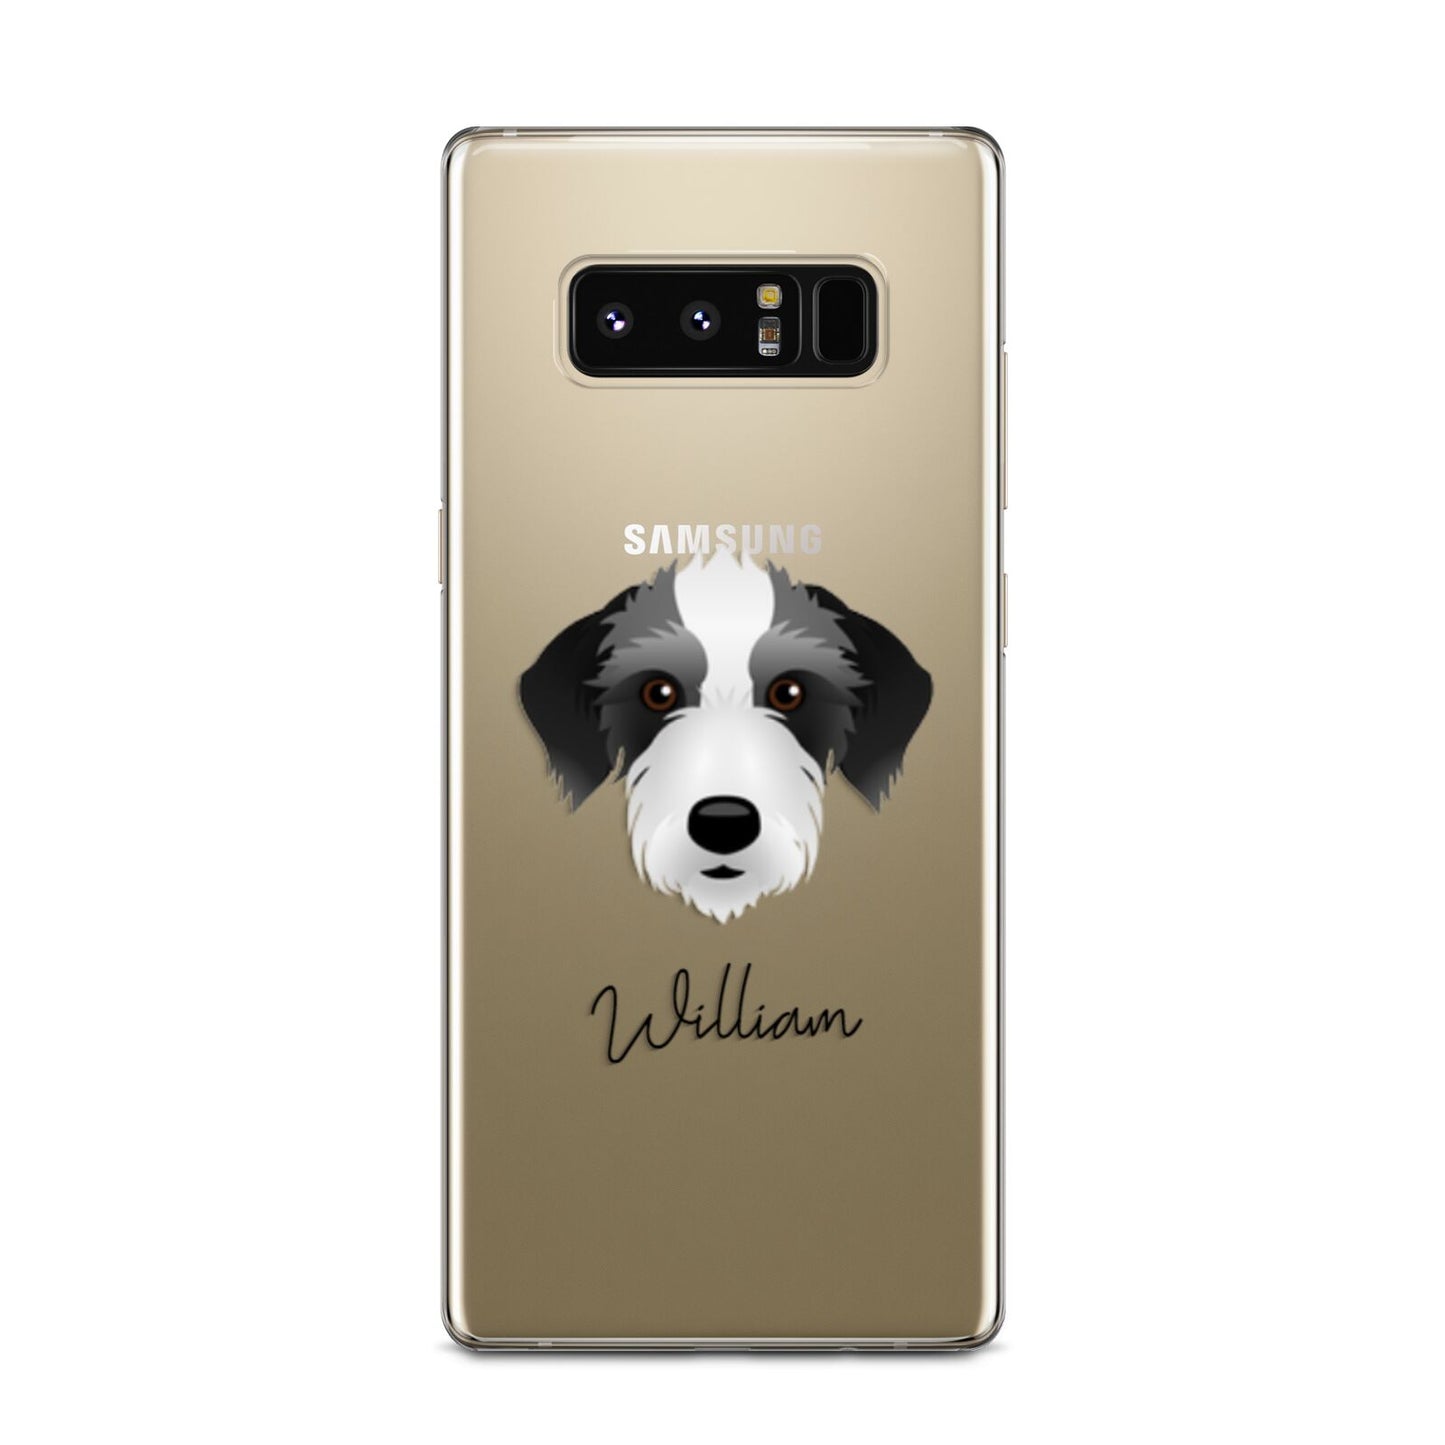 Bedlington Whippet Personalised Samsung Galaxy Note 8 Case